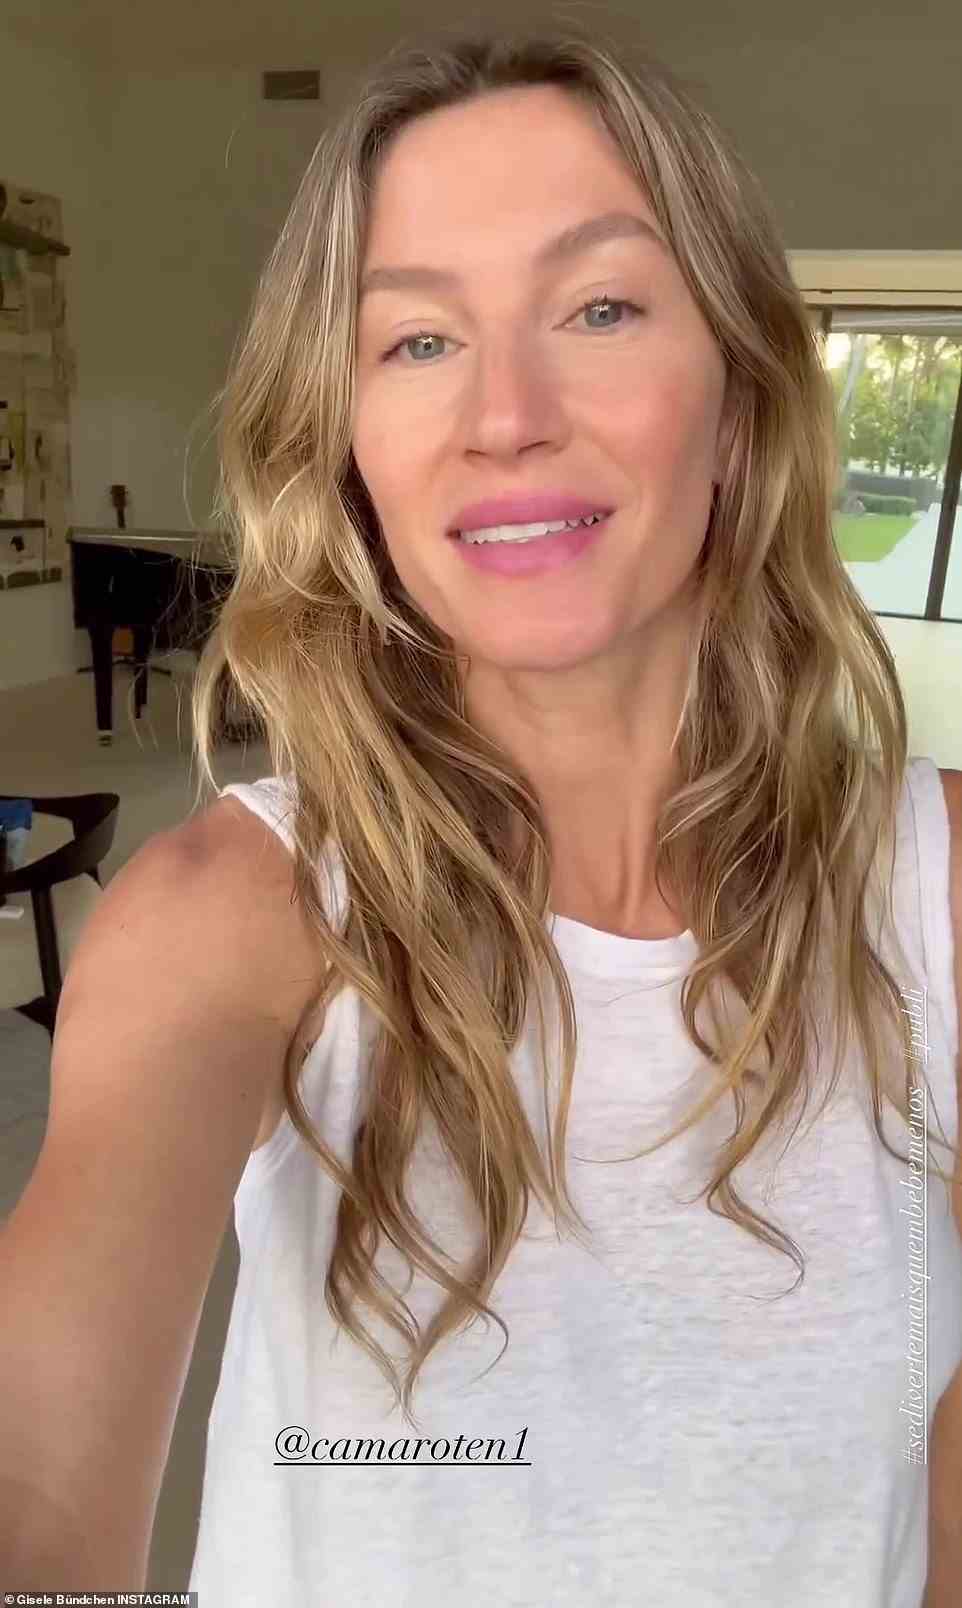 I spy... a piano! Gisele Bundchen has been sharing videos taken inside her current residence in Florida recently. On Thursday the 42-year-old Vogue model was at it again as she spoke to the camera while in a Miami mansion